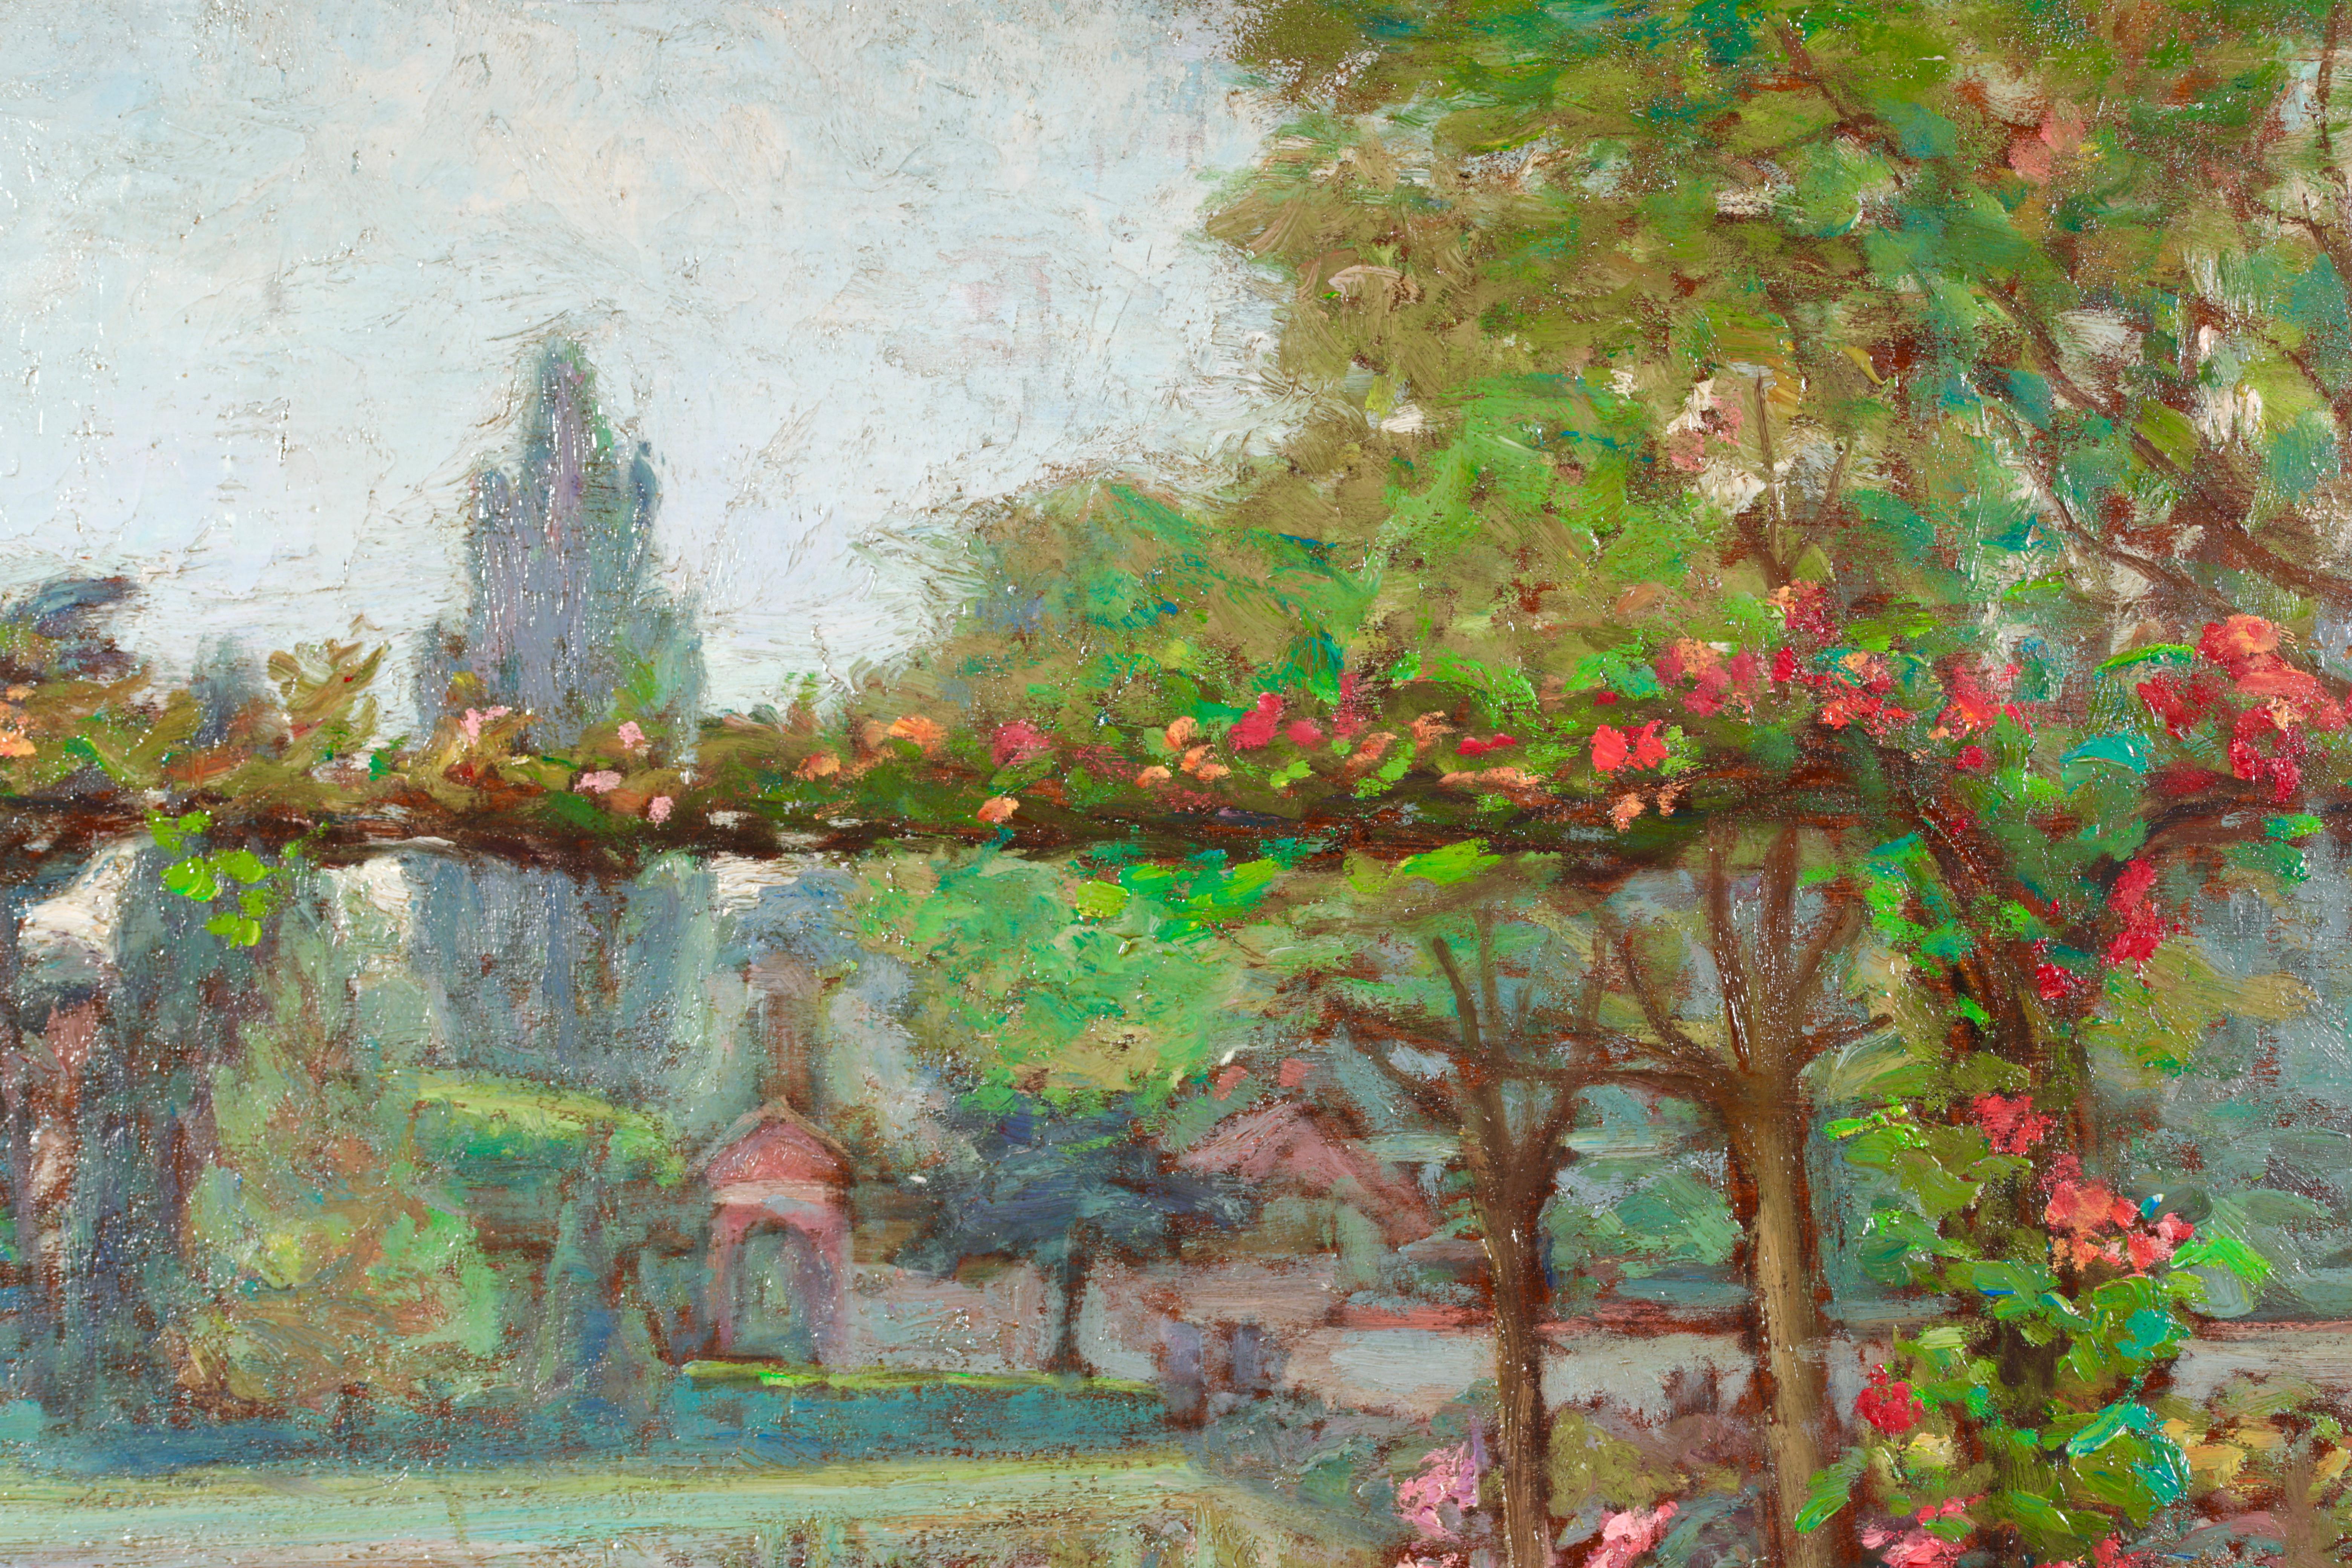 Stunning signed post impressionist oil on panel circa 1920 by French painter Emile Octave Denis Victor Guillonnet. The work depicts a summer garden filled with vibrant flowers in reds, pinks, yellows and whites, with green lawn and trees beyond.